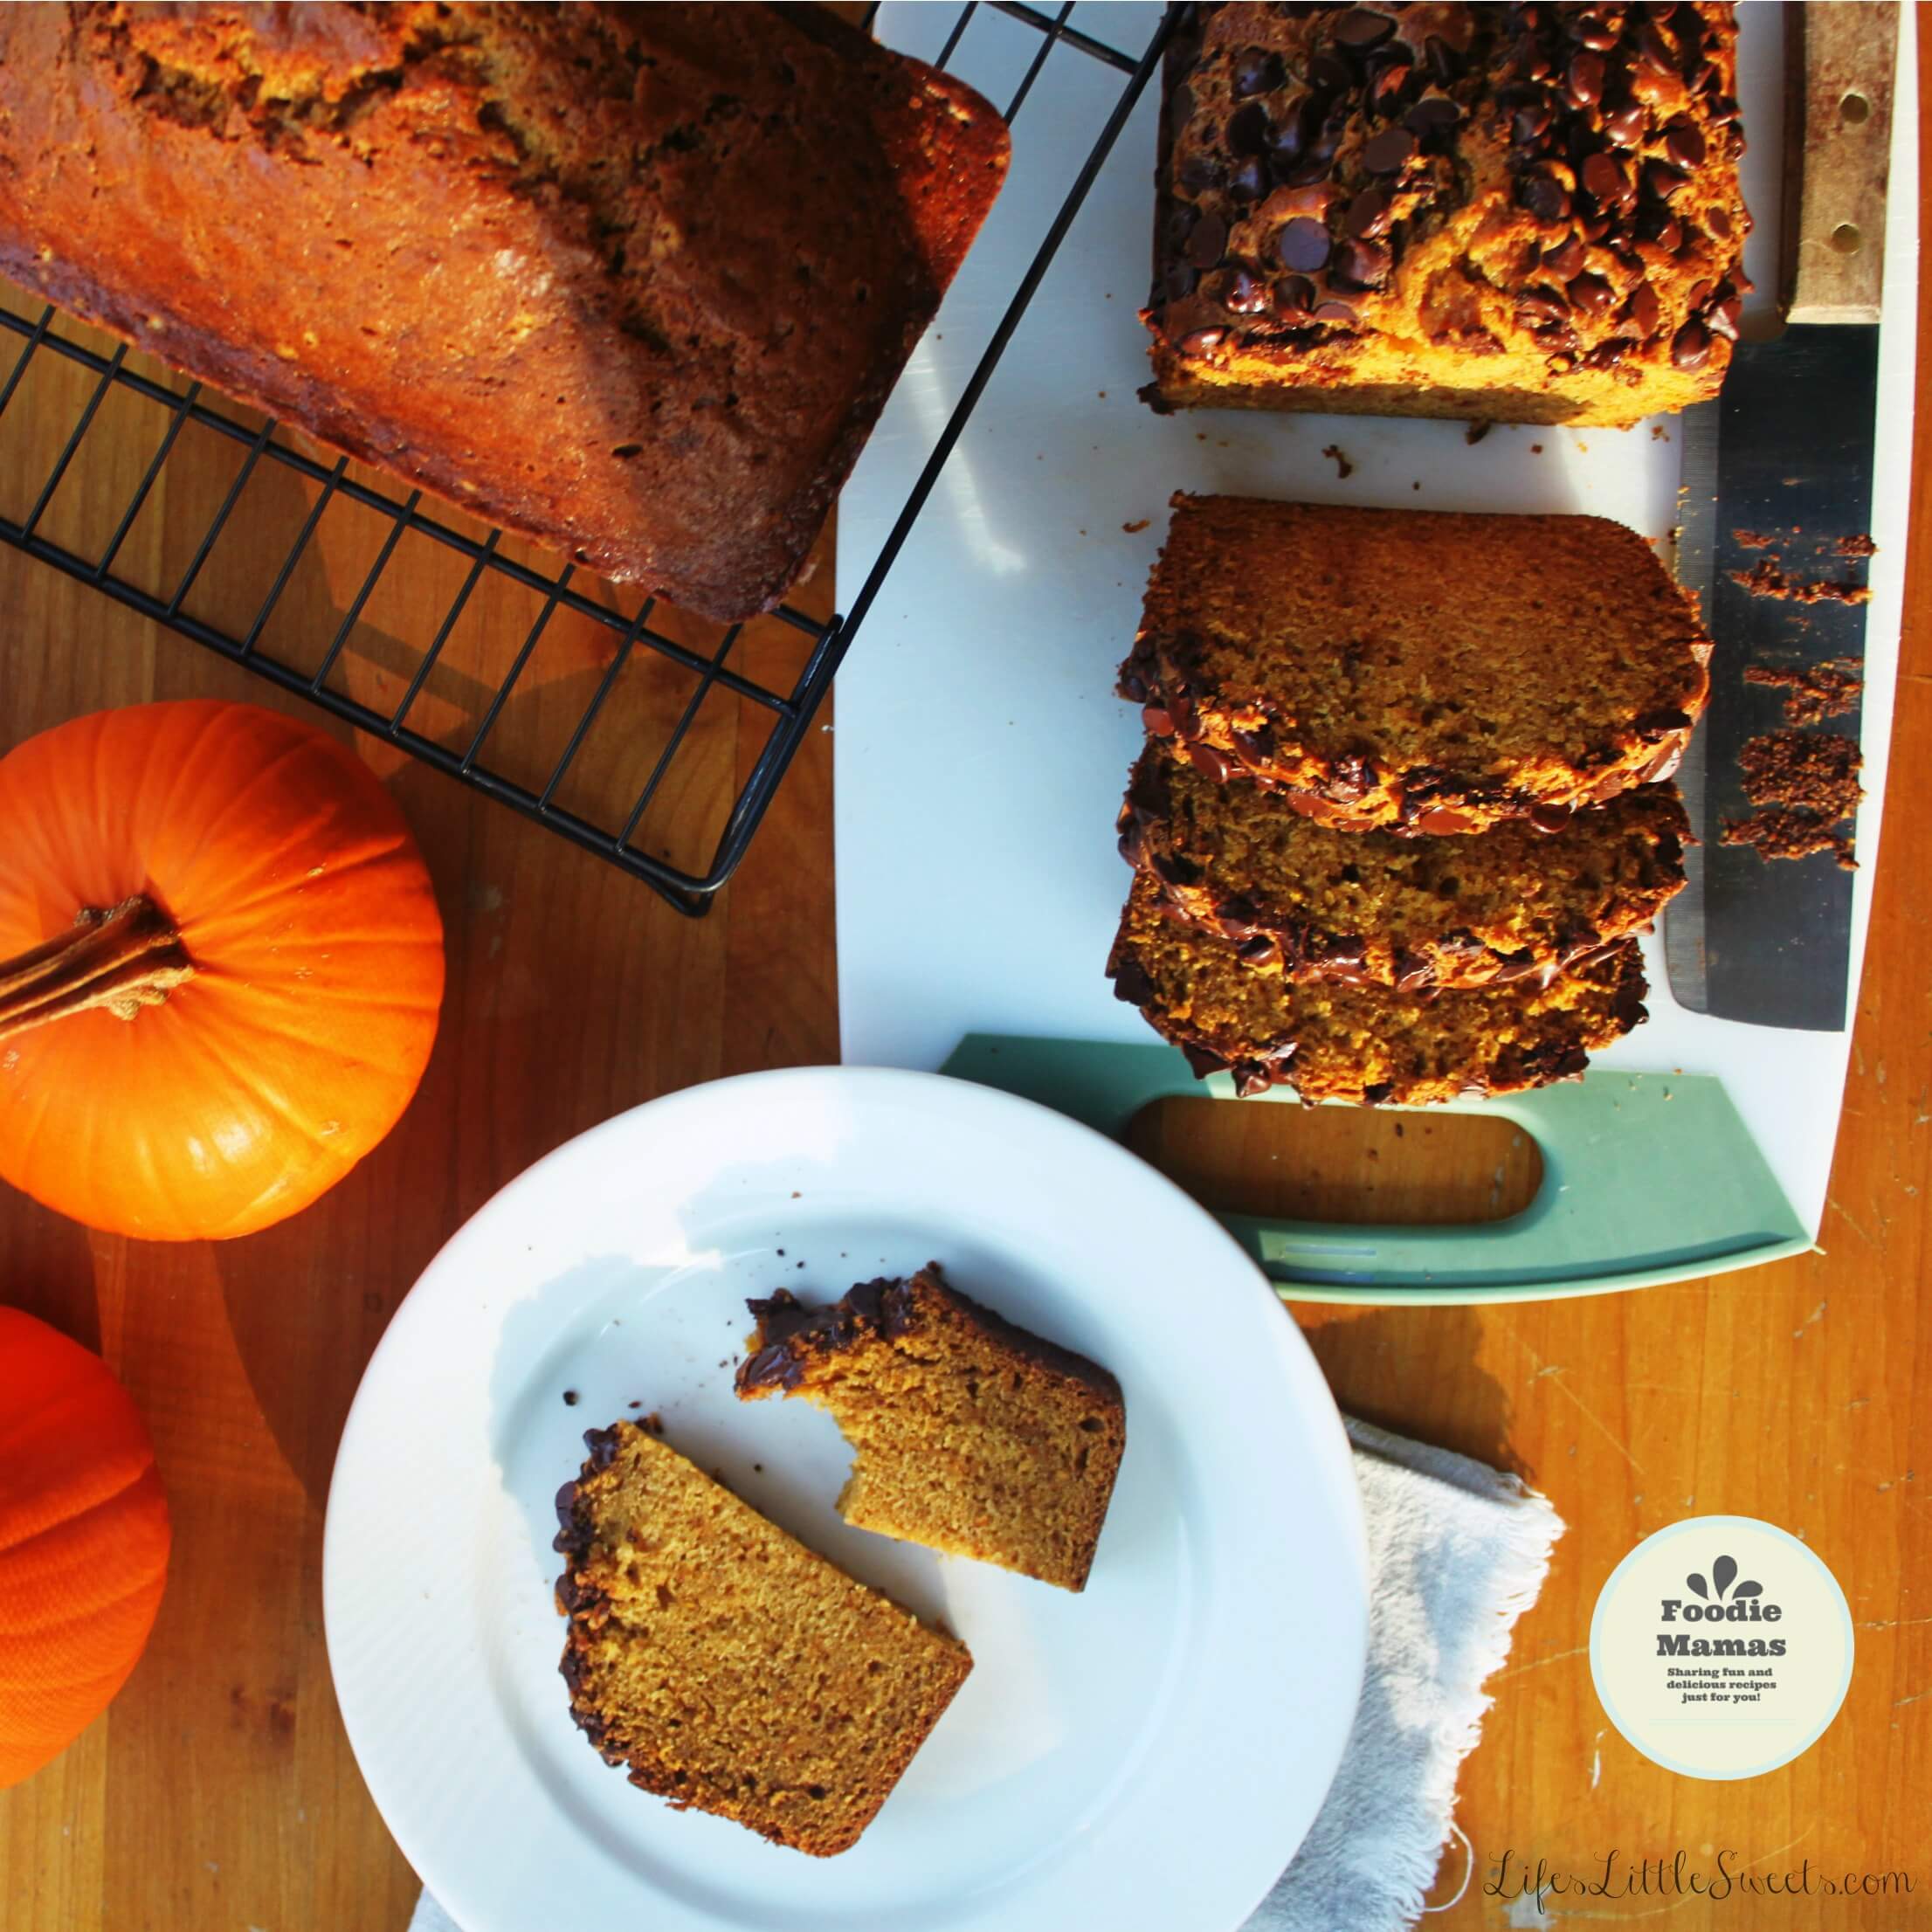 This Pumpkin Spice Bread yields 2 generous loaves and can be customized with your favorite toppings and Vanilla Coconut Icing! Bring this favorite to your next holiday gathering! Be sure to check out the other #FoodieMamas pumpkin recipes in the post! #pumpkin #bread #pumpkinspice